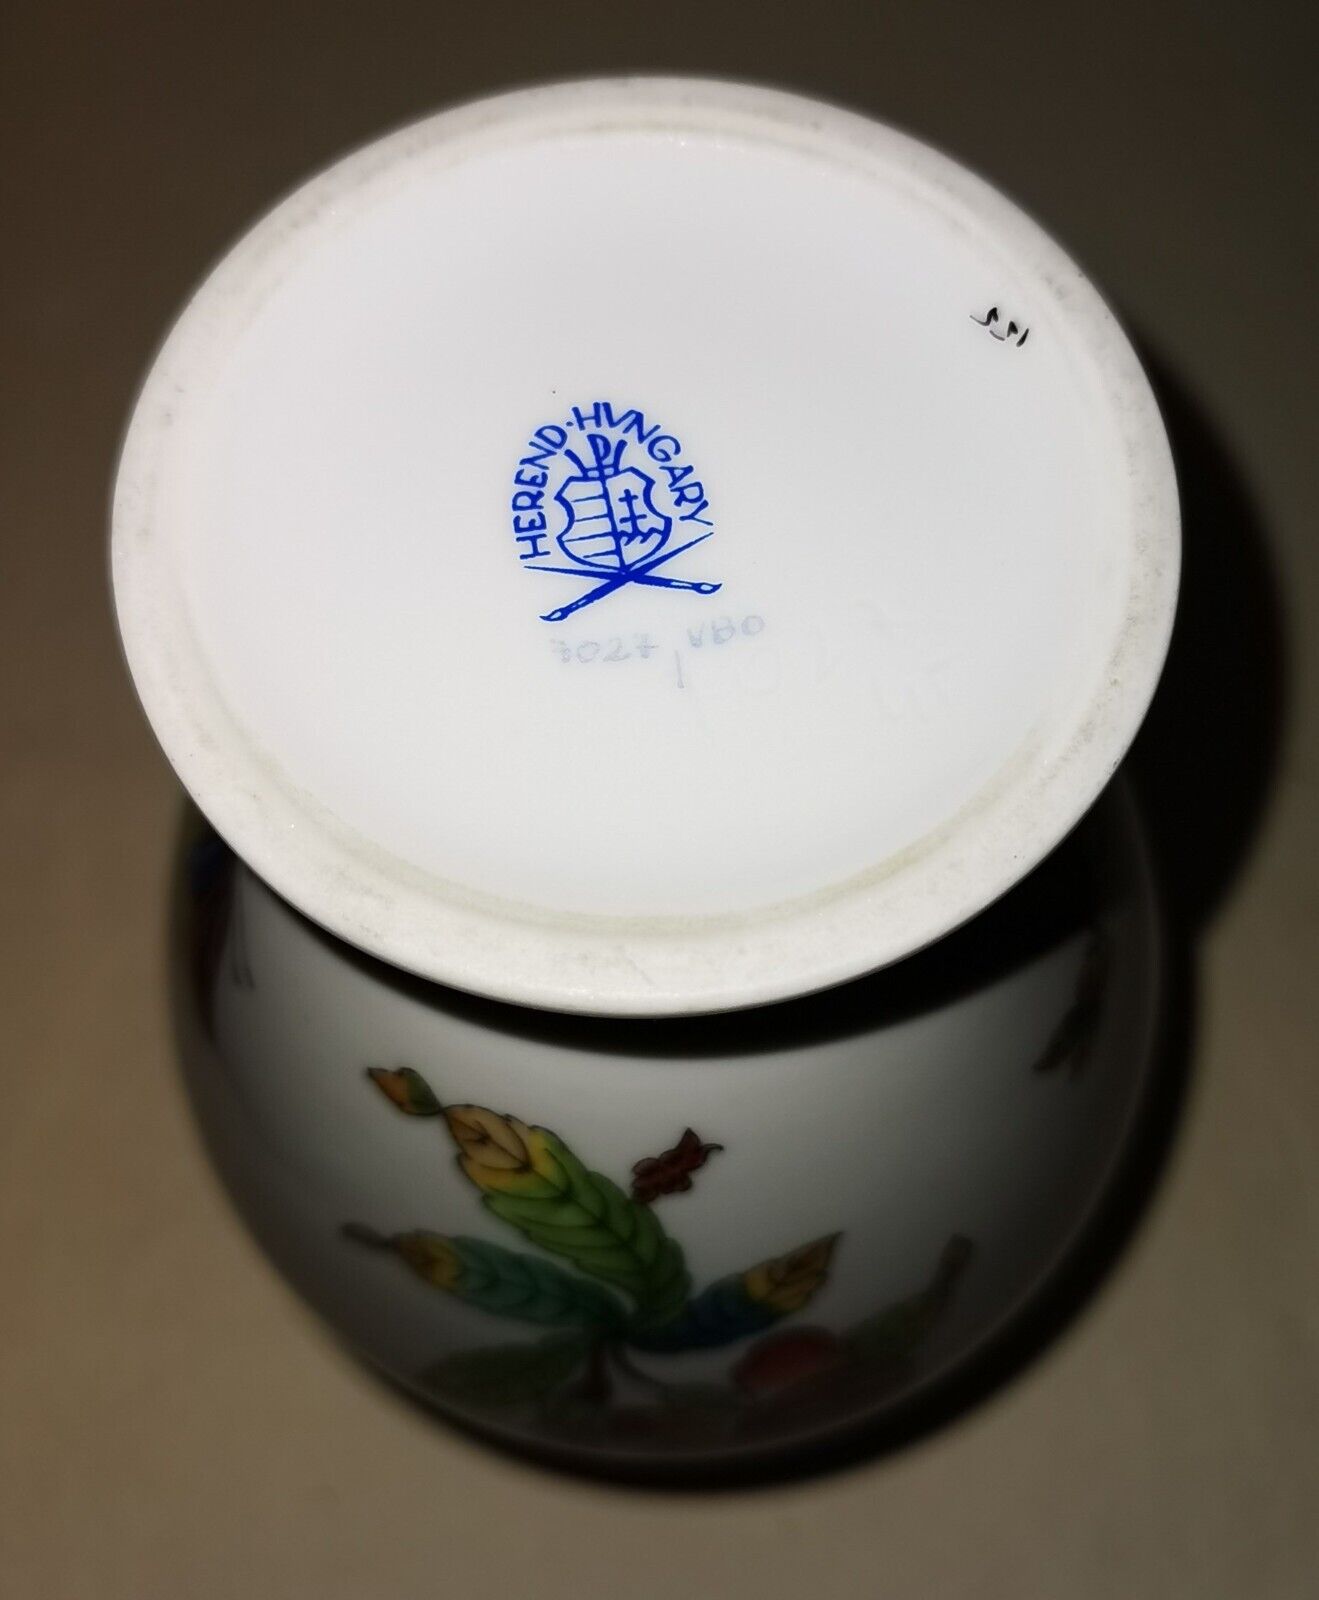 Elegant porcelain vase - Butterflies and flower decoration from Herend Hungary